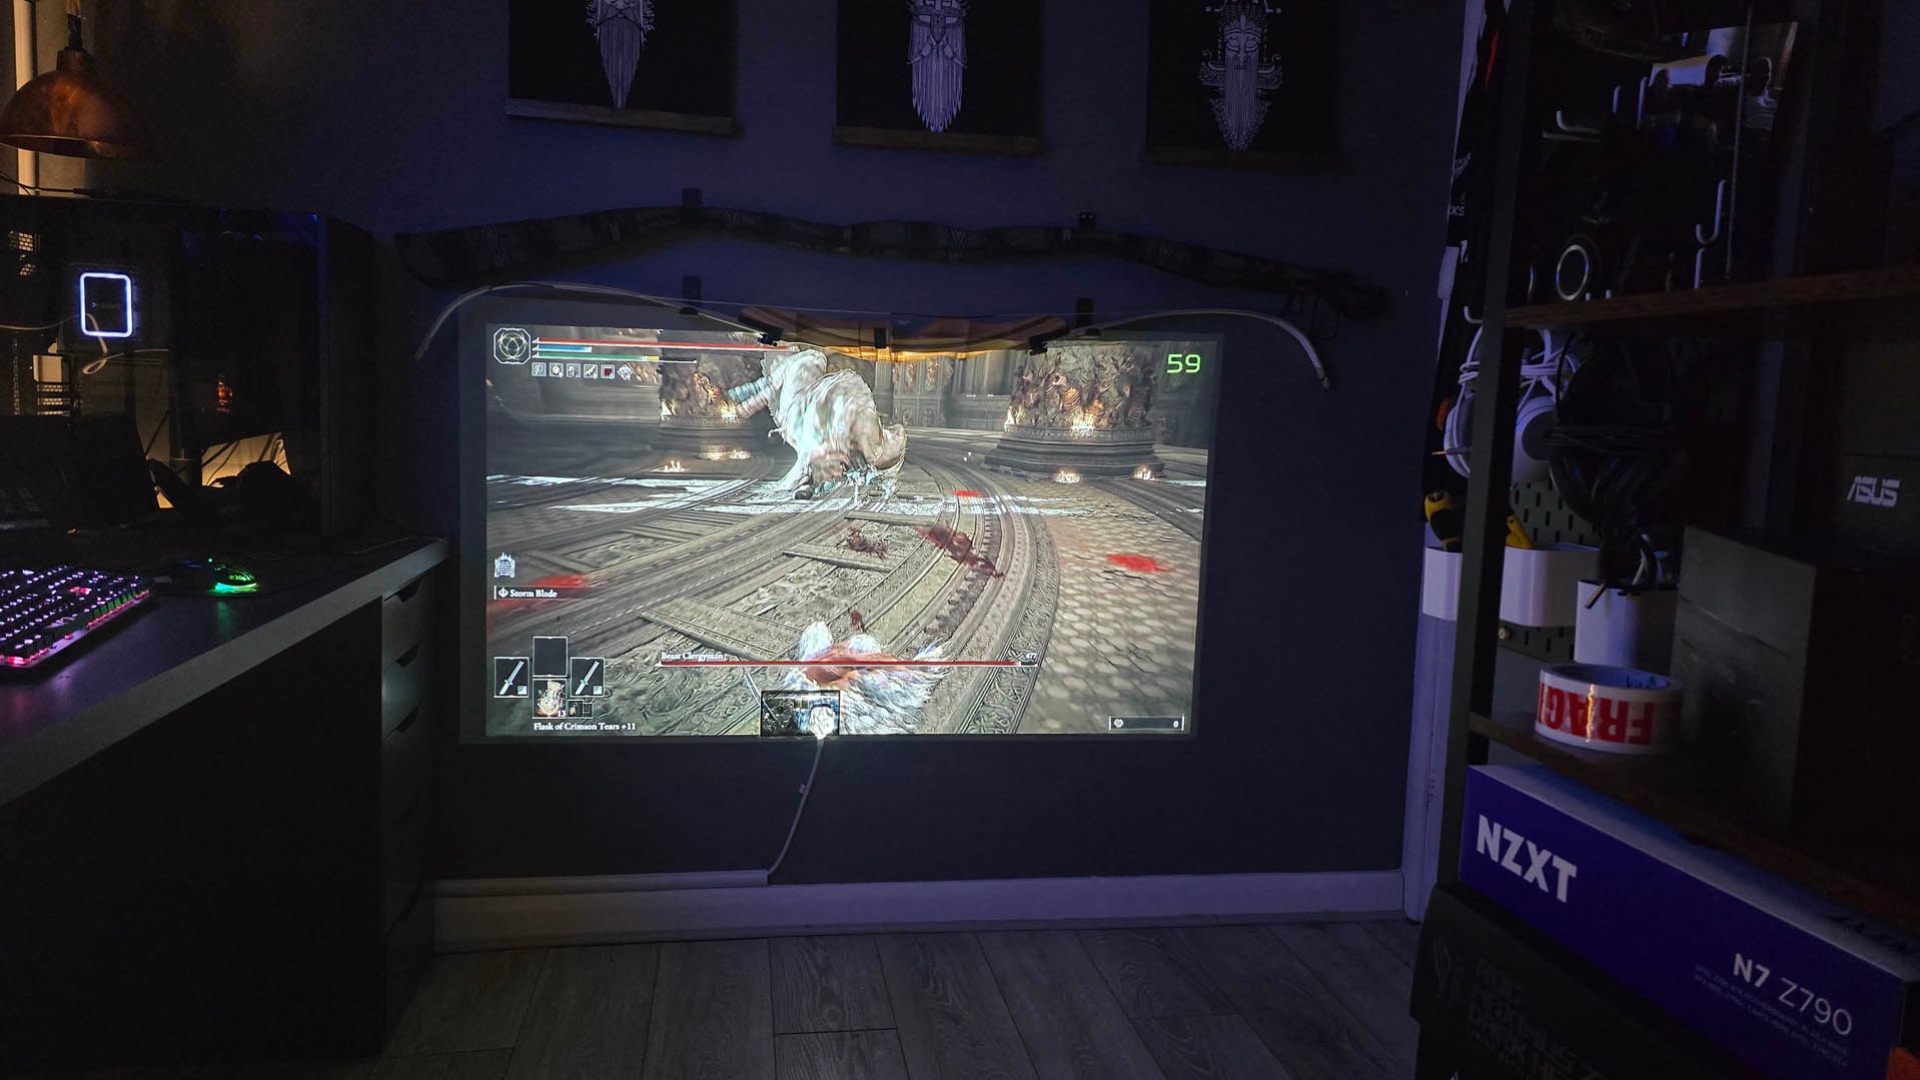 Acer Predator GM713 Projector review image showing the projector projecting the game Elden Ring.